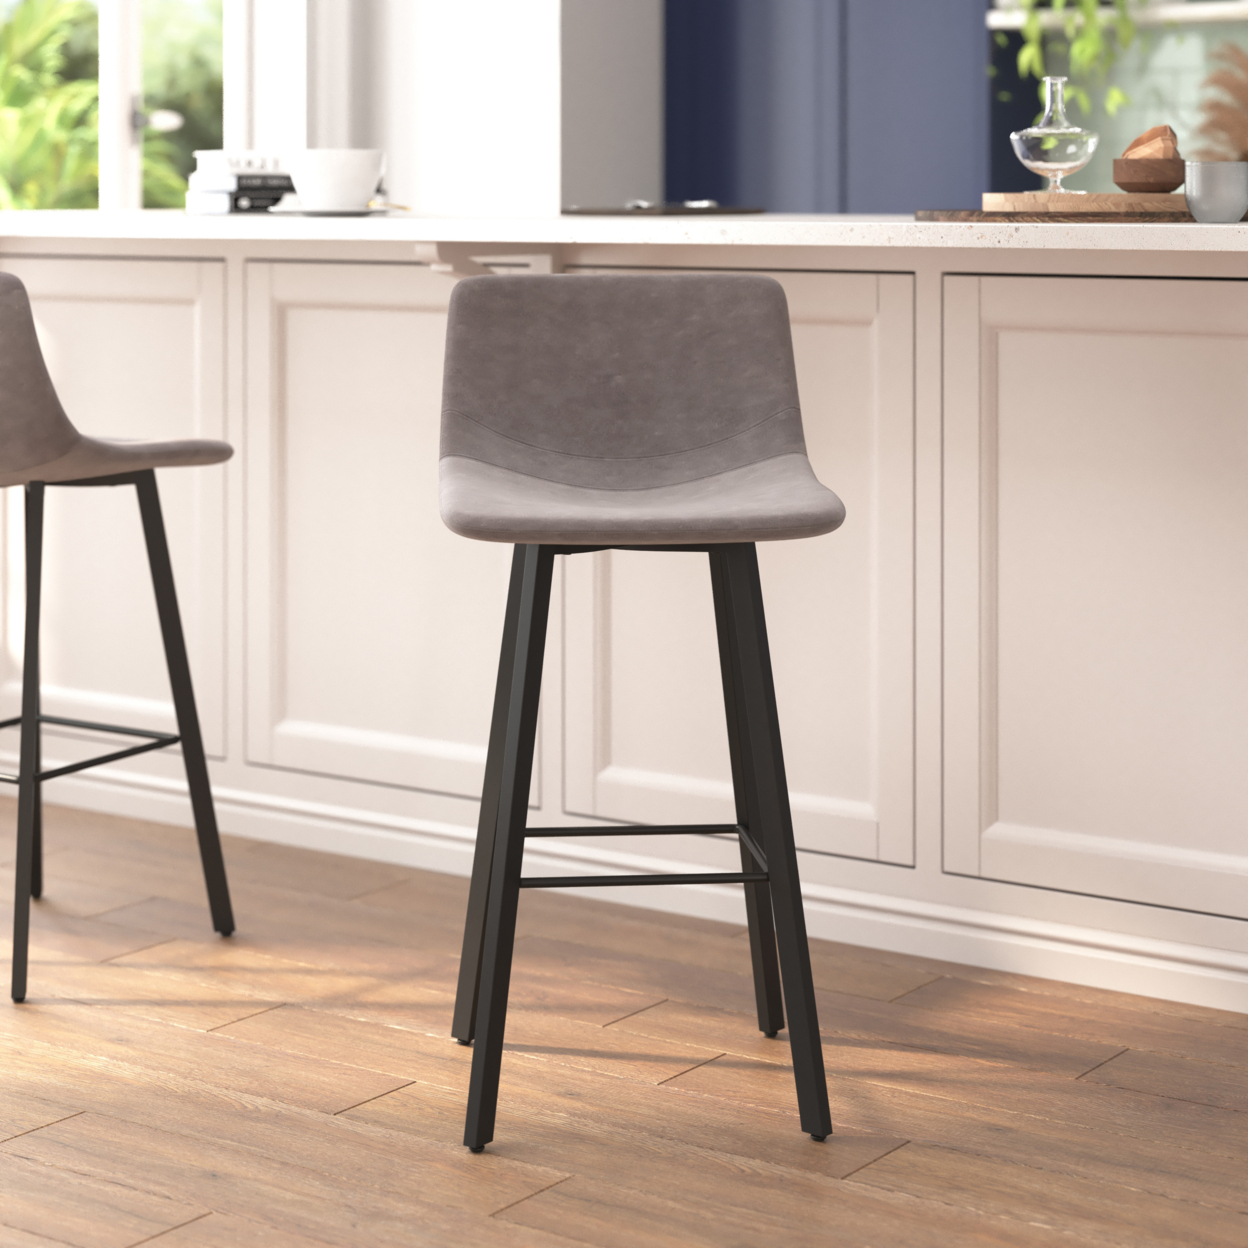 2 Piece 30 Inch Stool, Gray Leather, Metal Angled Legs